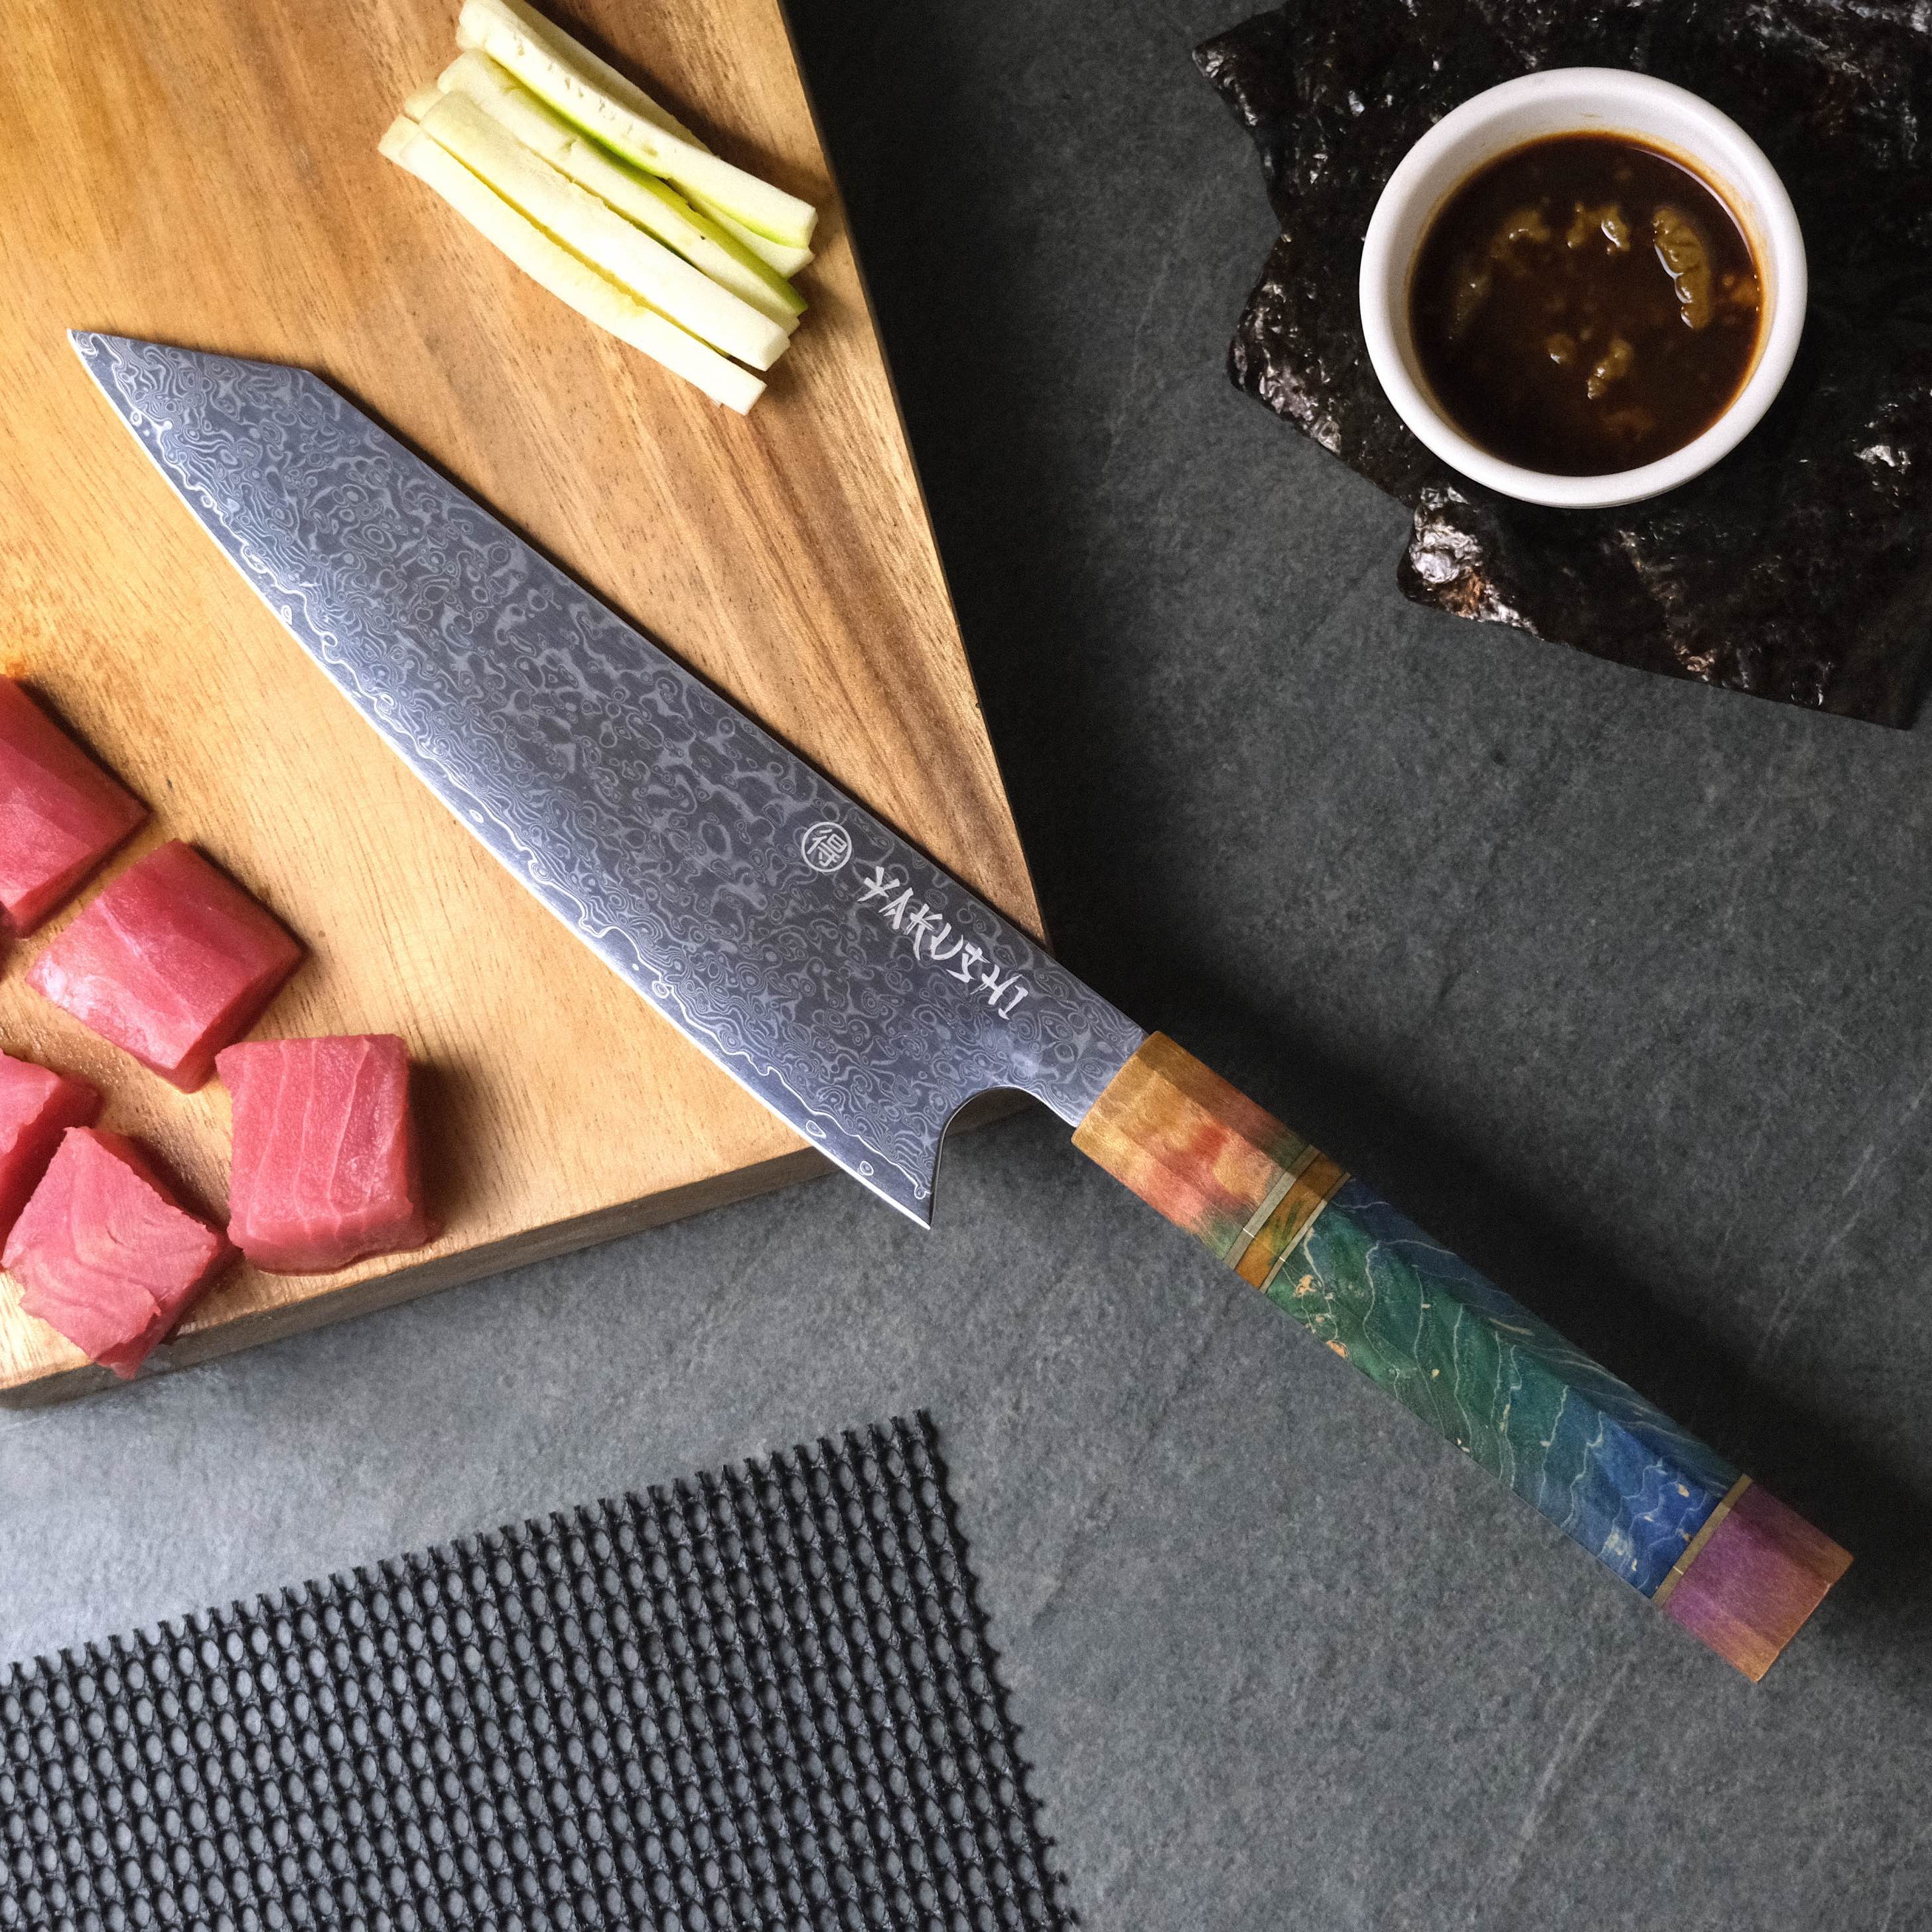 Yakushi Knives™ Premium Knives & Accessories - 50% Off Sale | Yakushi™ Knives are designed and built to offer optimal performance for beginner to professional chefs. 